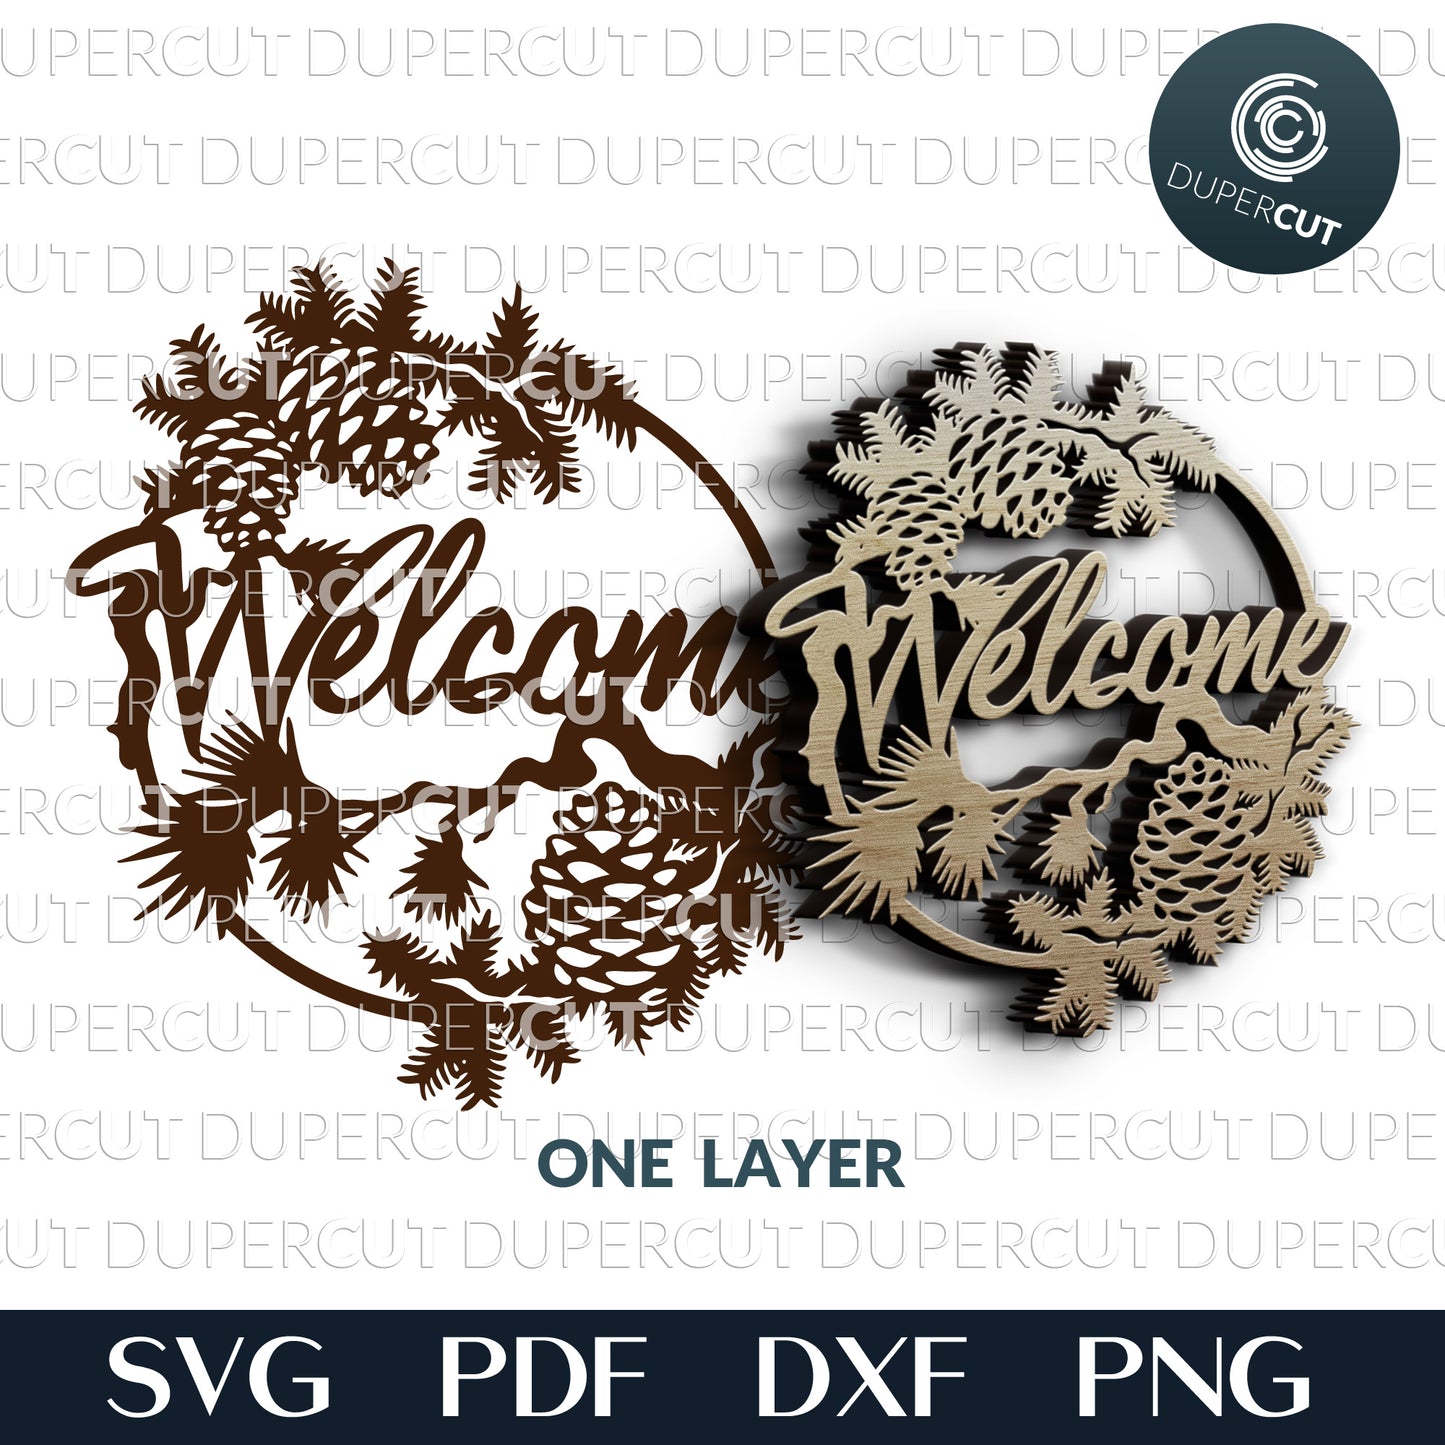 Pine trees welcome sign - laser cutting files SVG PDF DXF vector template for Glowforge, Cricut, Silhouette Cameo, CNC plasma machines